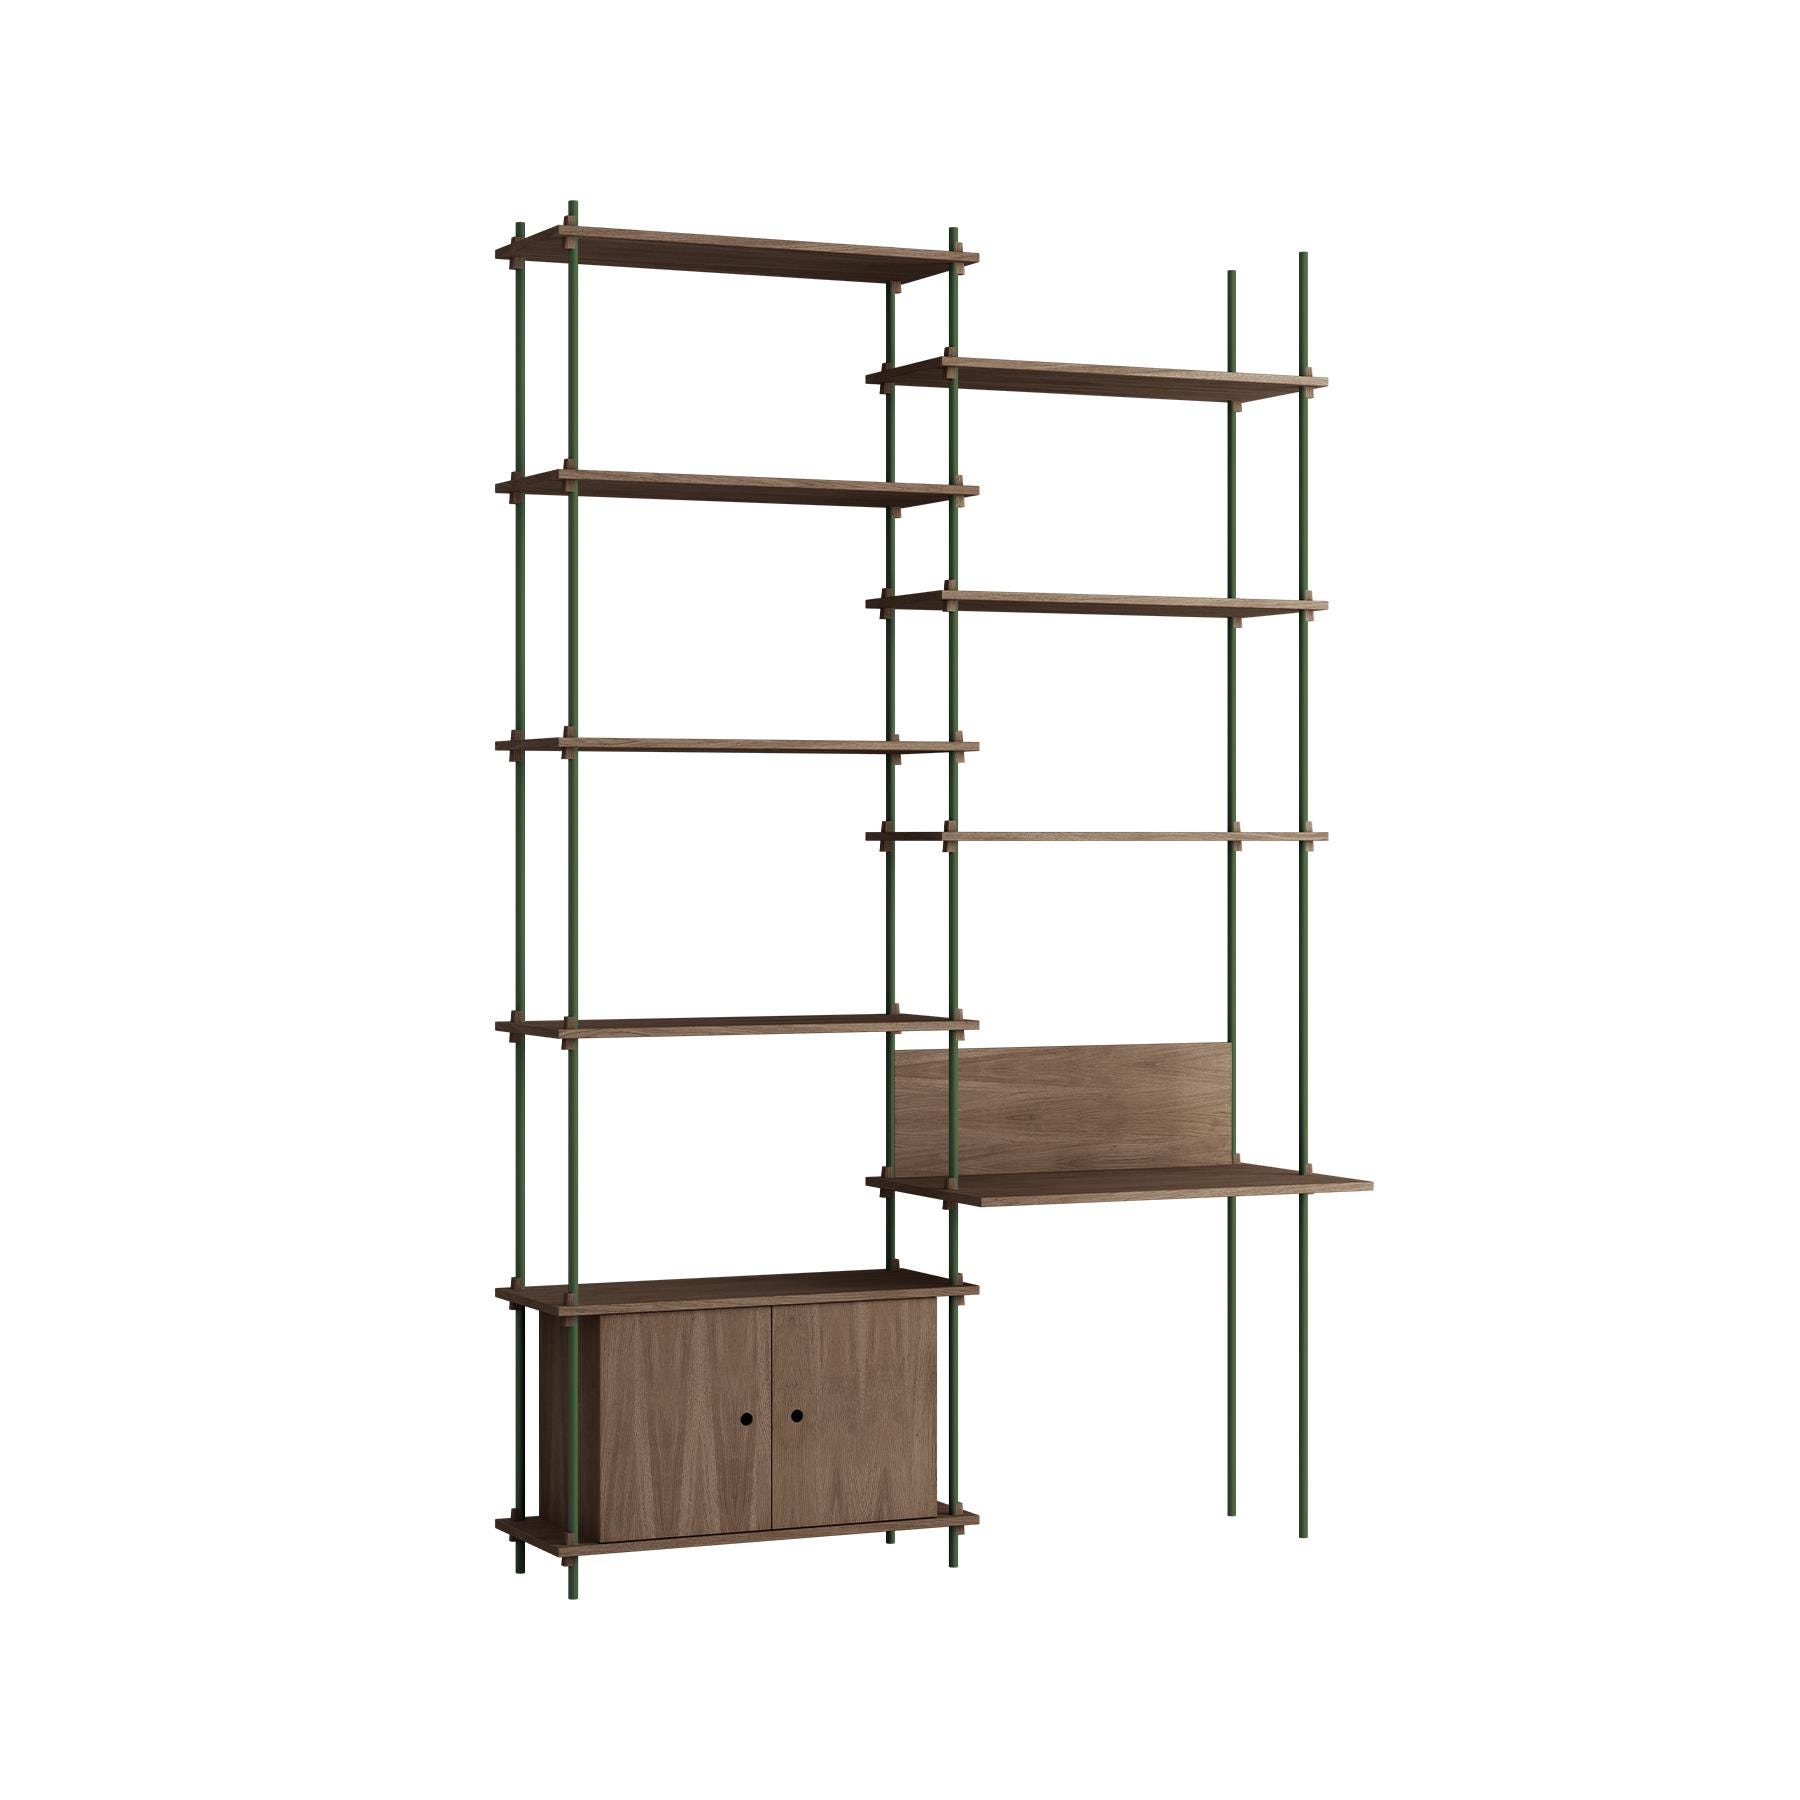 Moebe Double Shelving System With Desk And Cabinet Smoked Oak Pine Green Dark Wood Designer Furniture From Holloways Of Ludlow